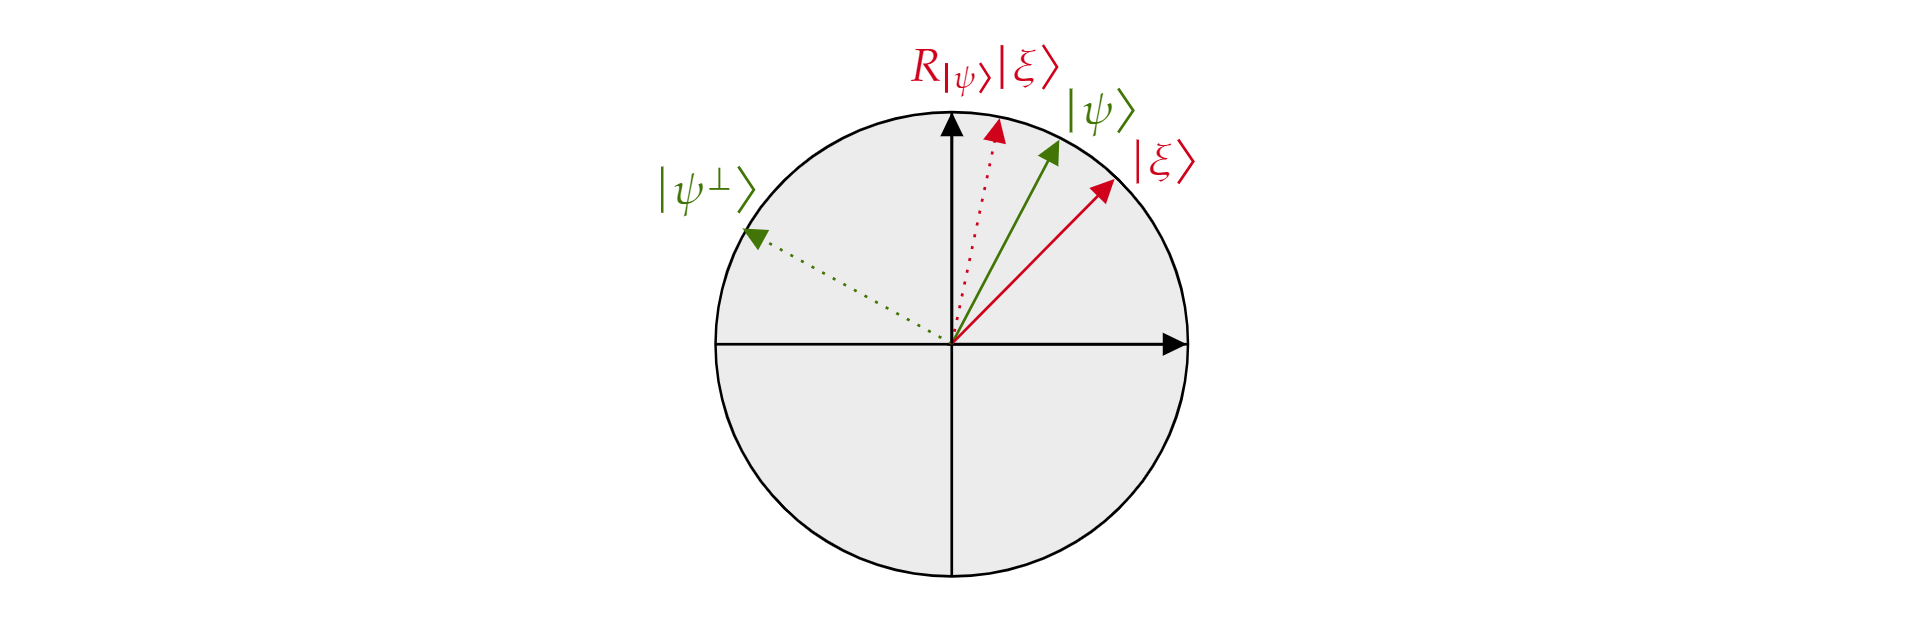 Plot of the reflection operator about the quantum state visualized in the plane.